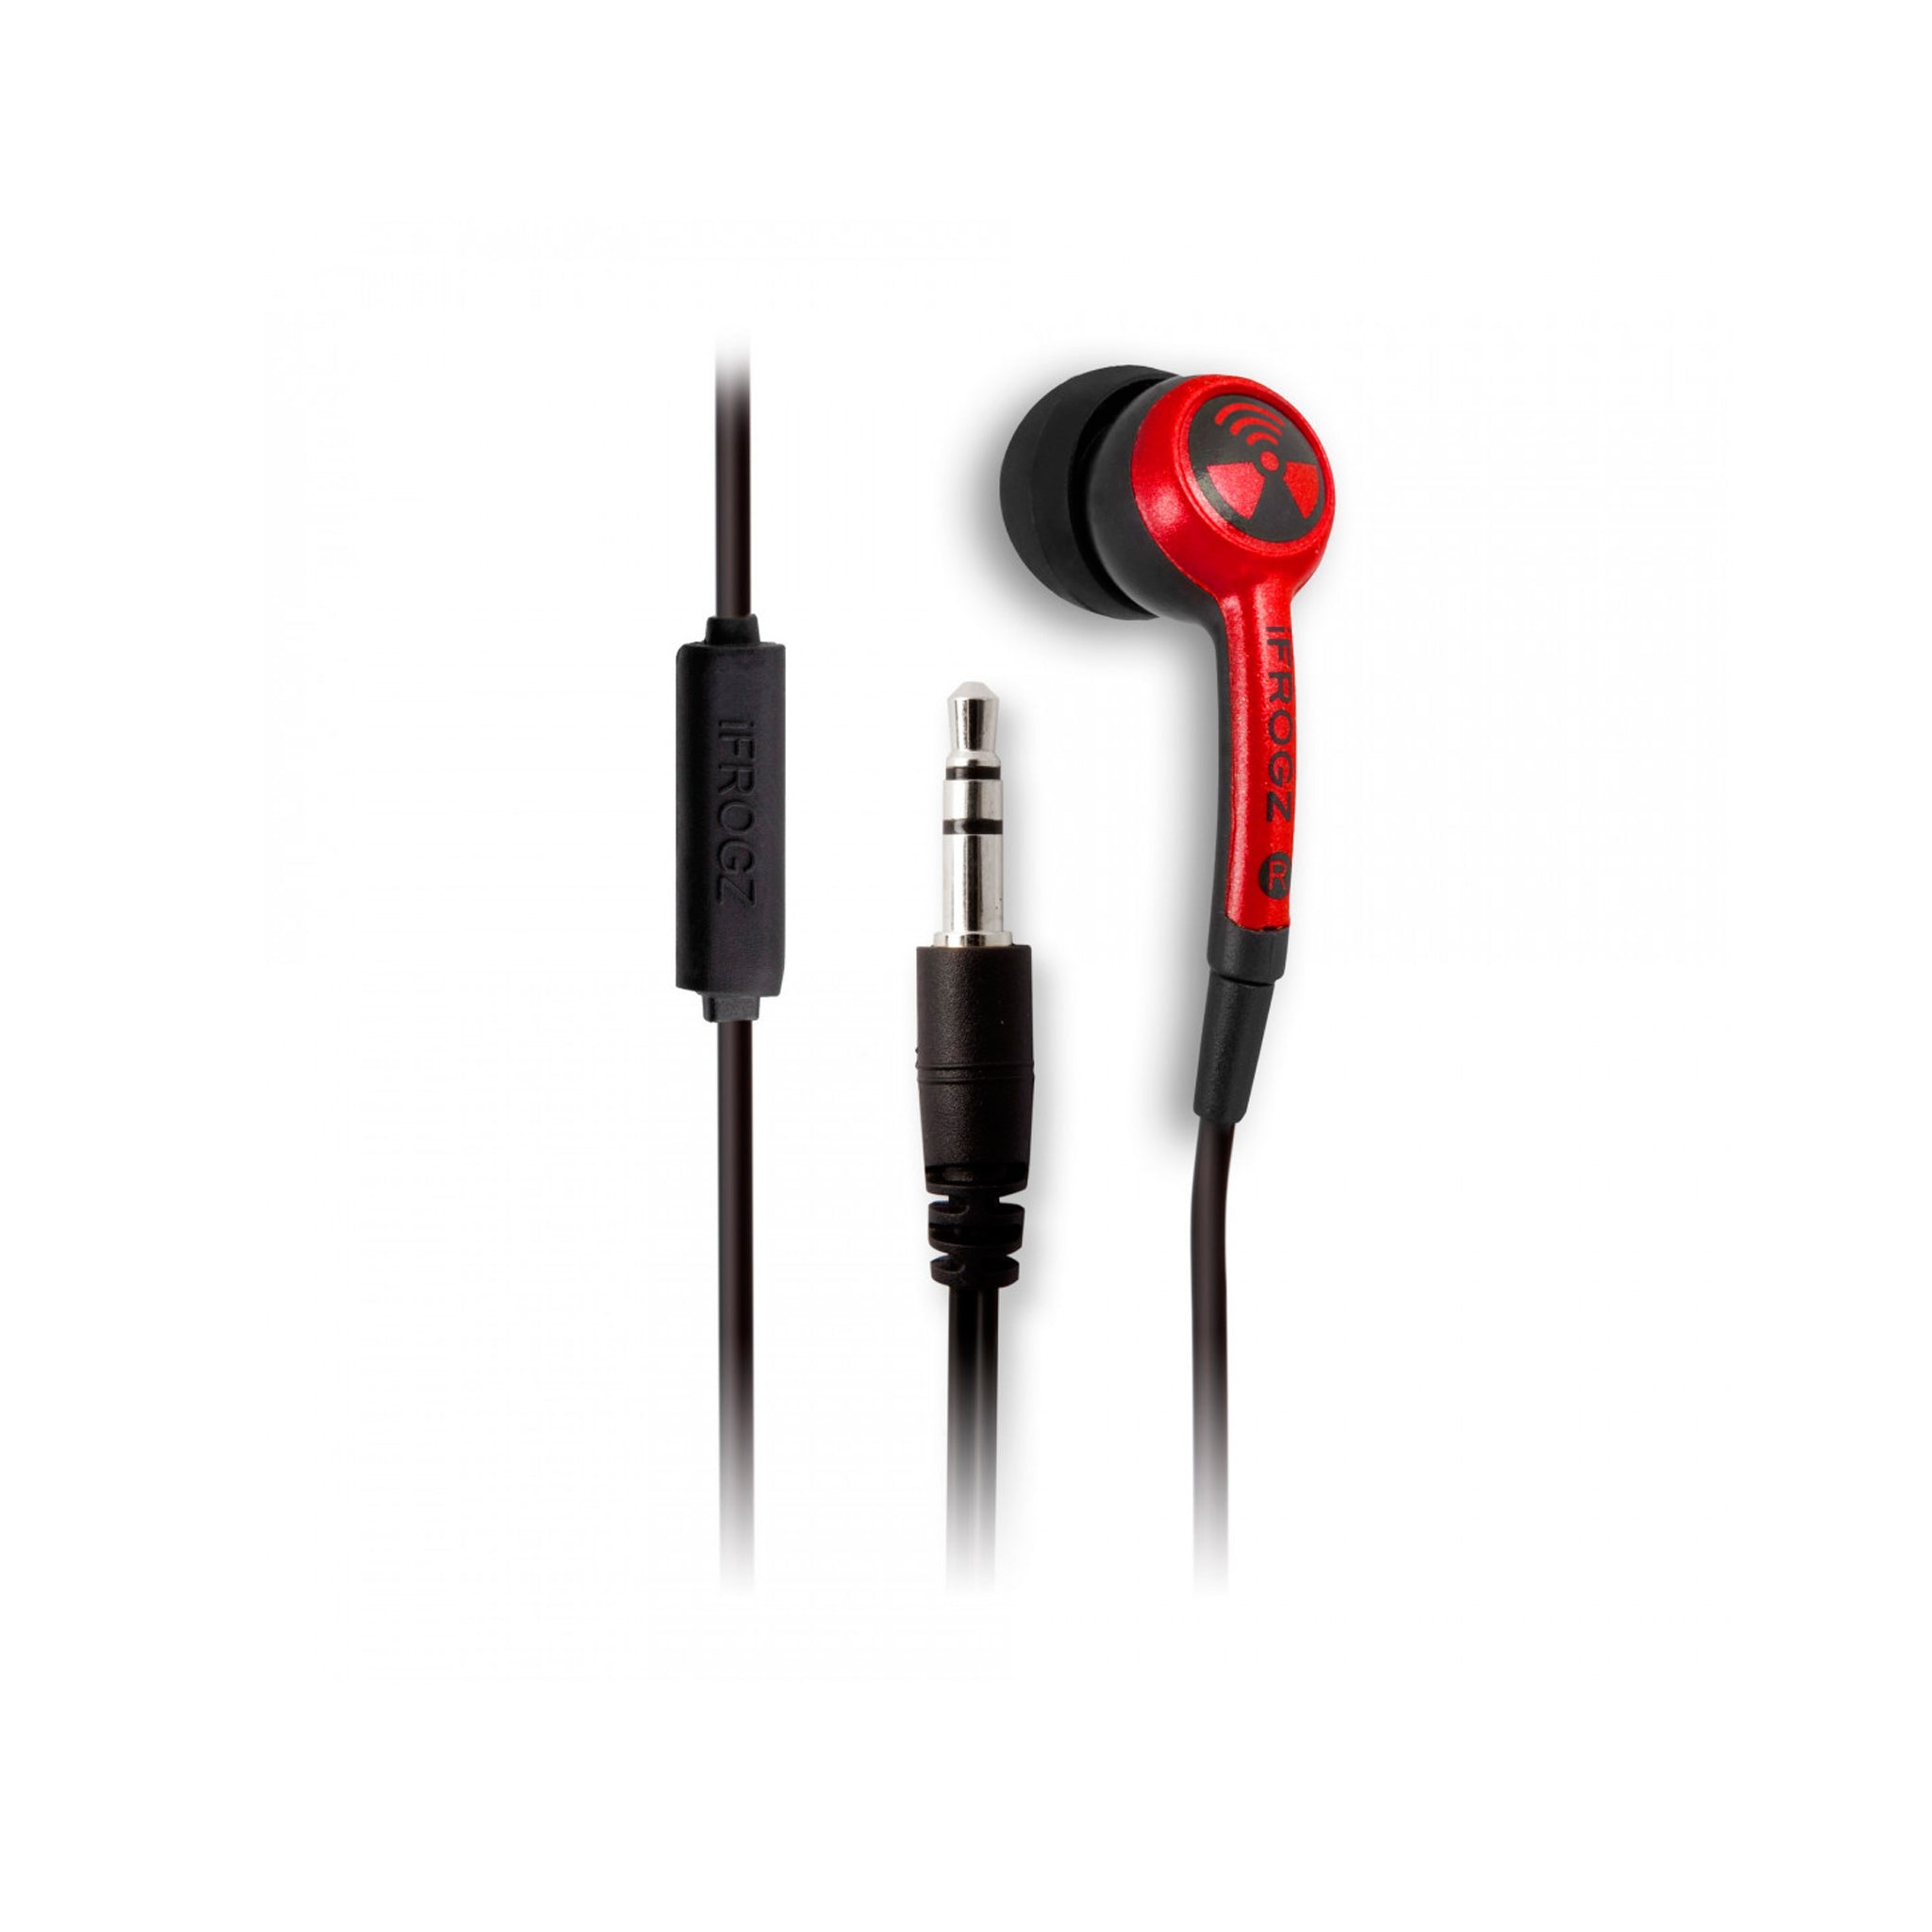 Ifrogz - Plugz In Ear Wired Headphones - Red